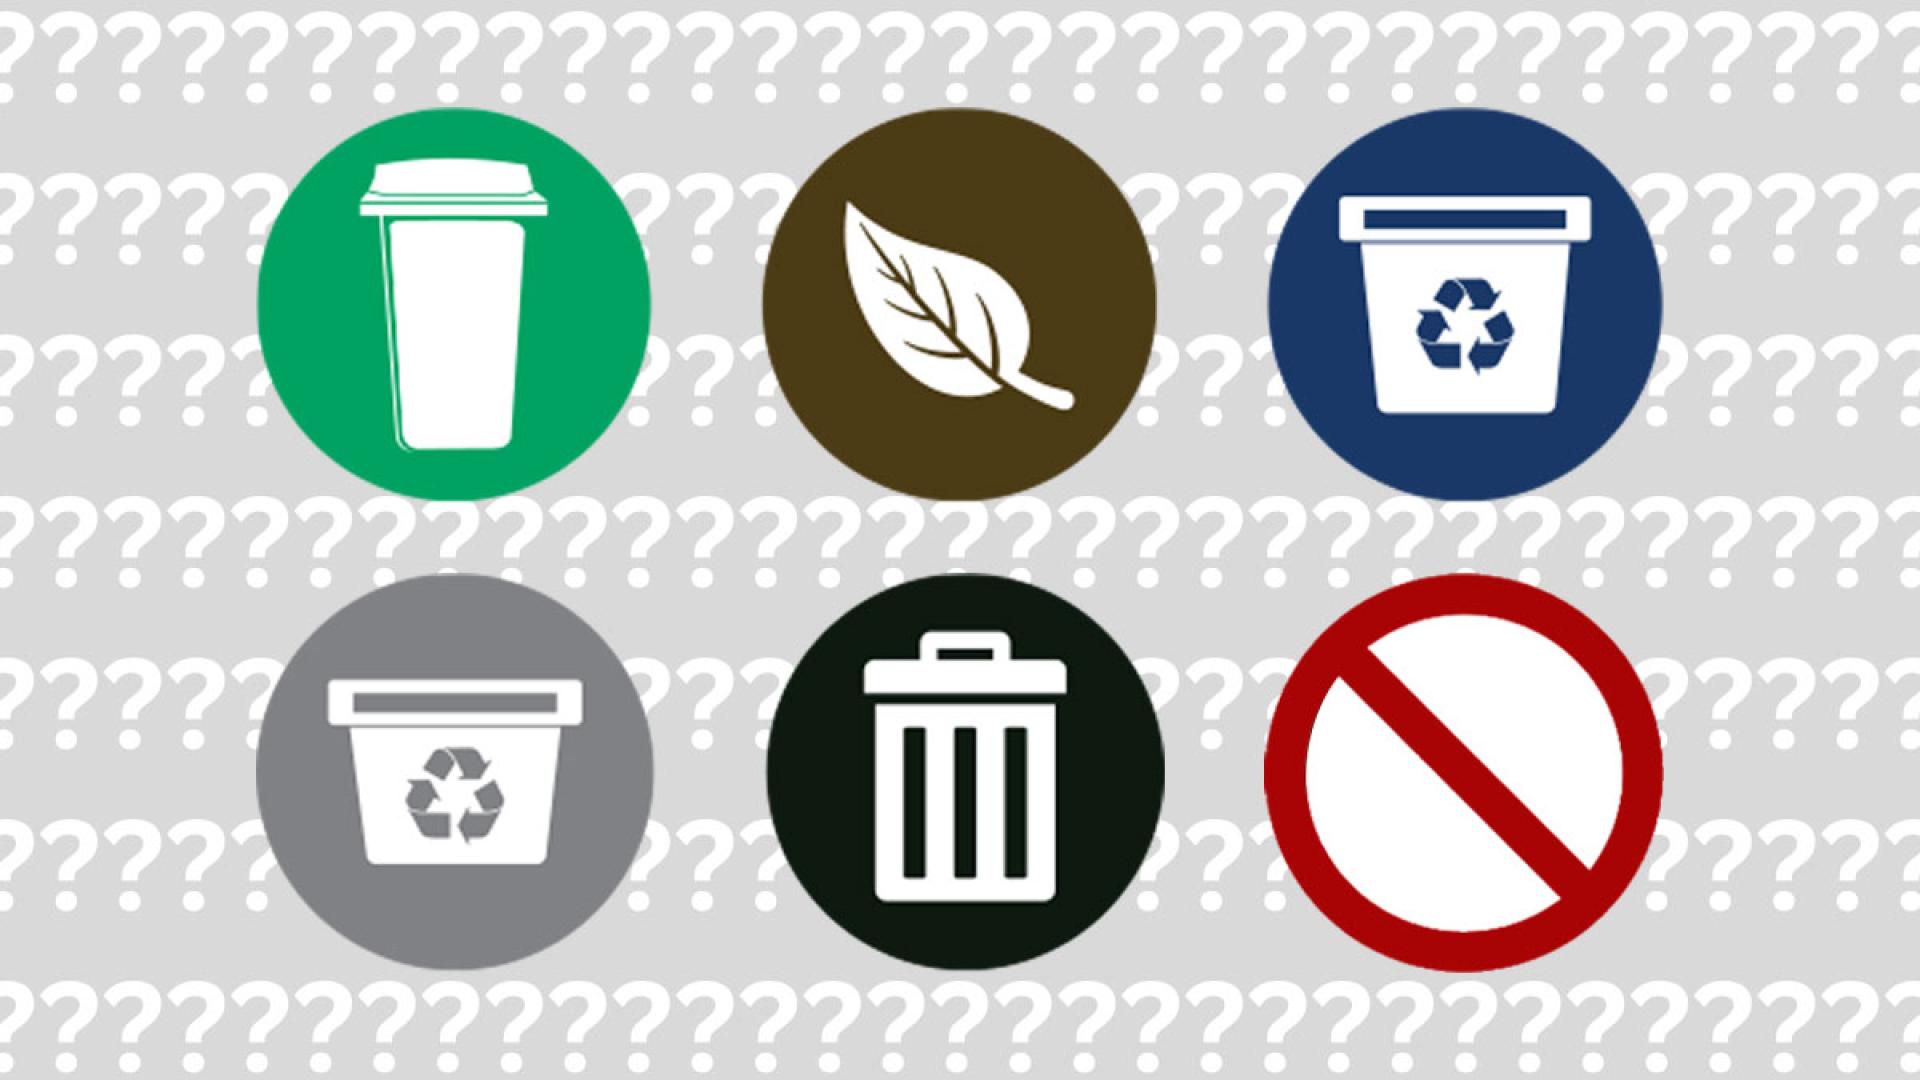 Icons for waste sorting over background pattern of question marks